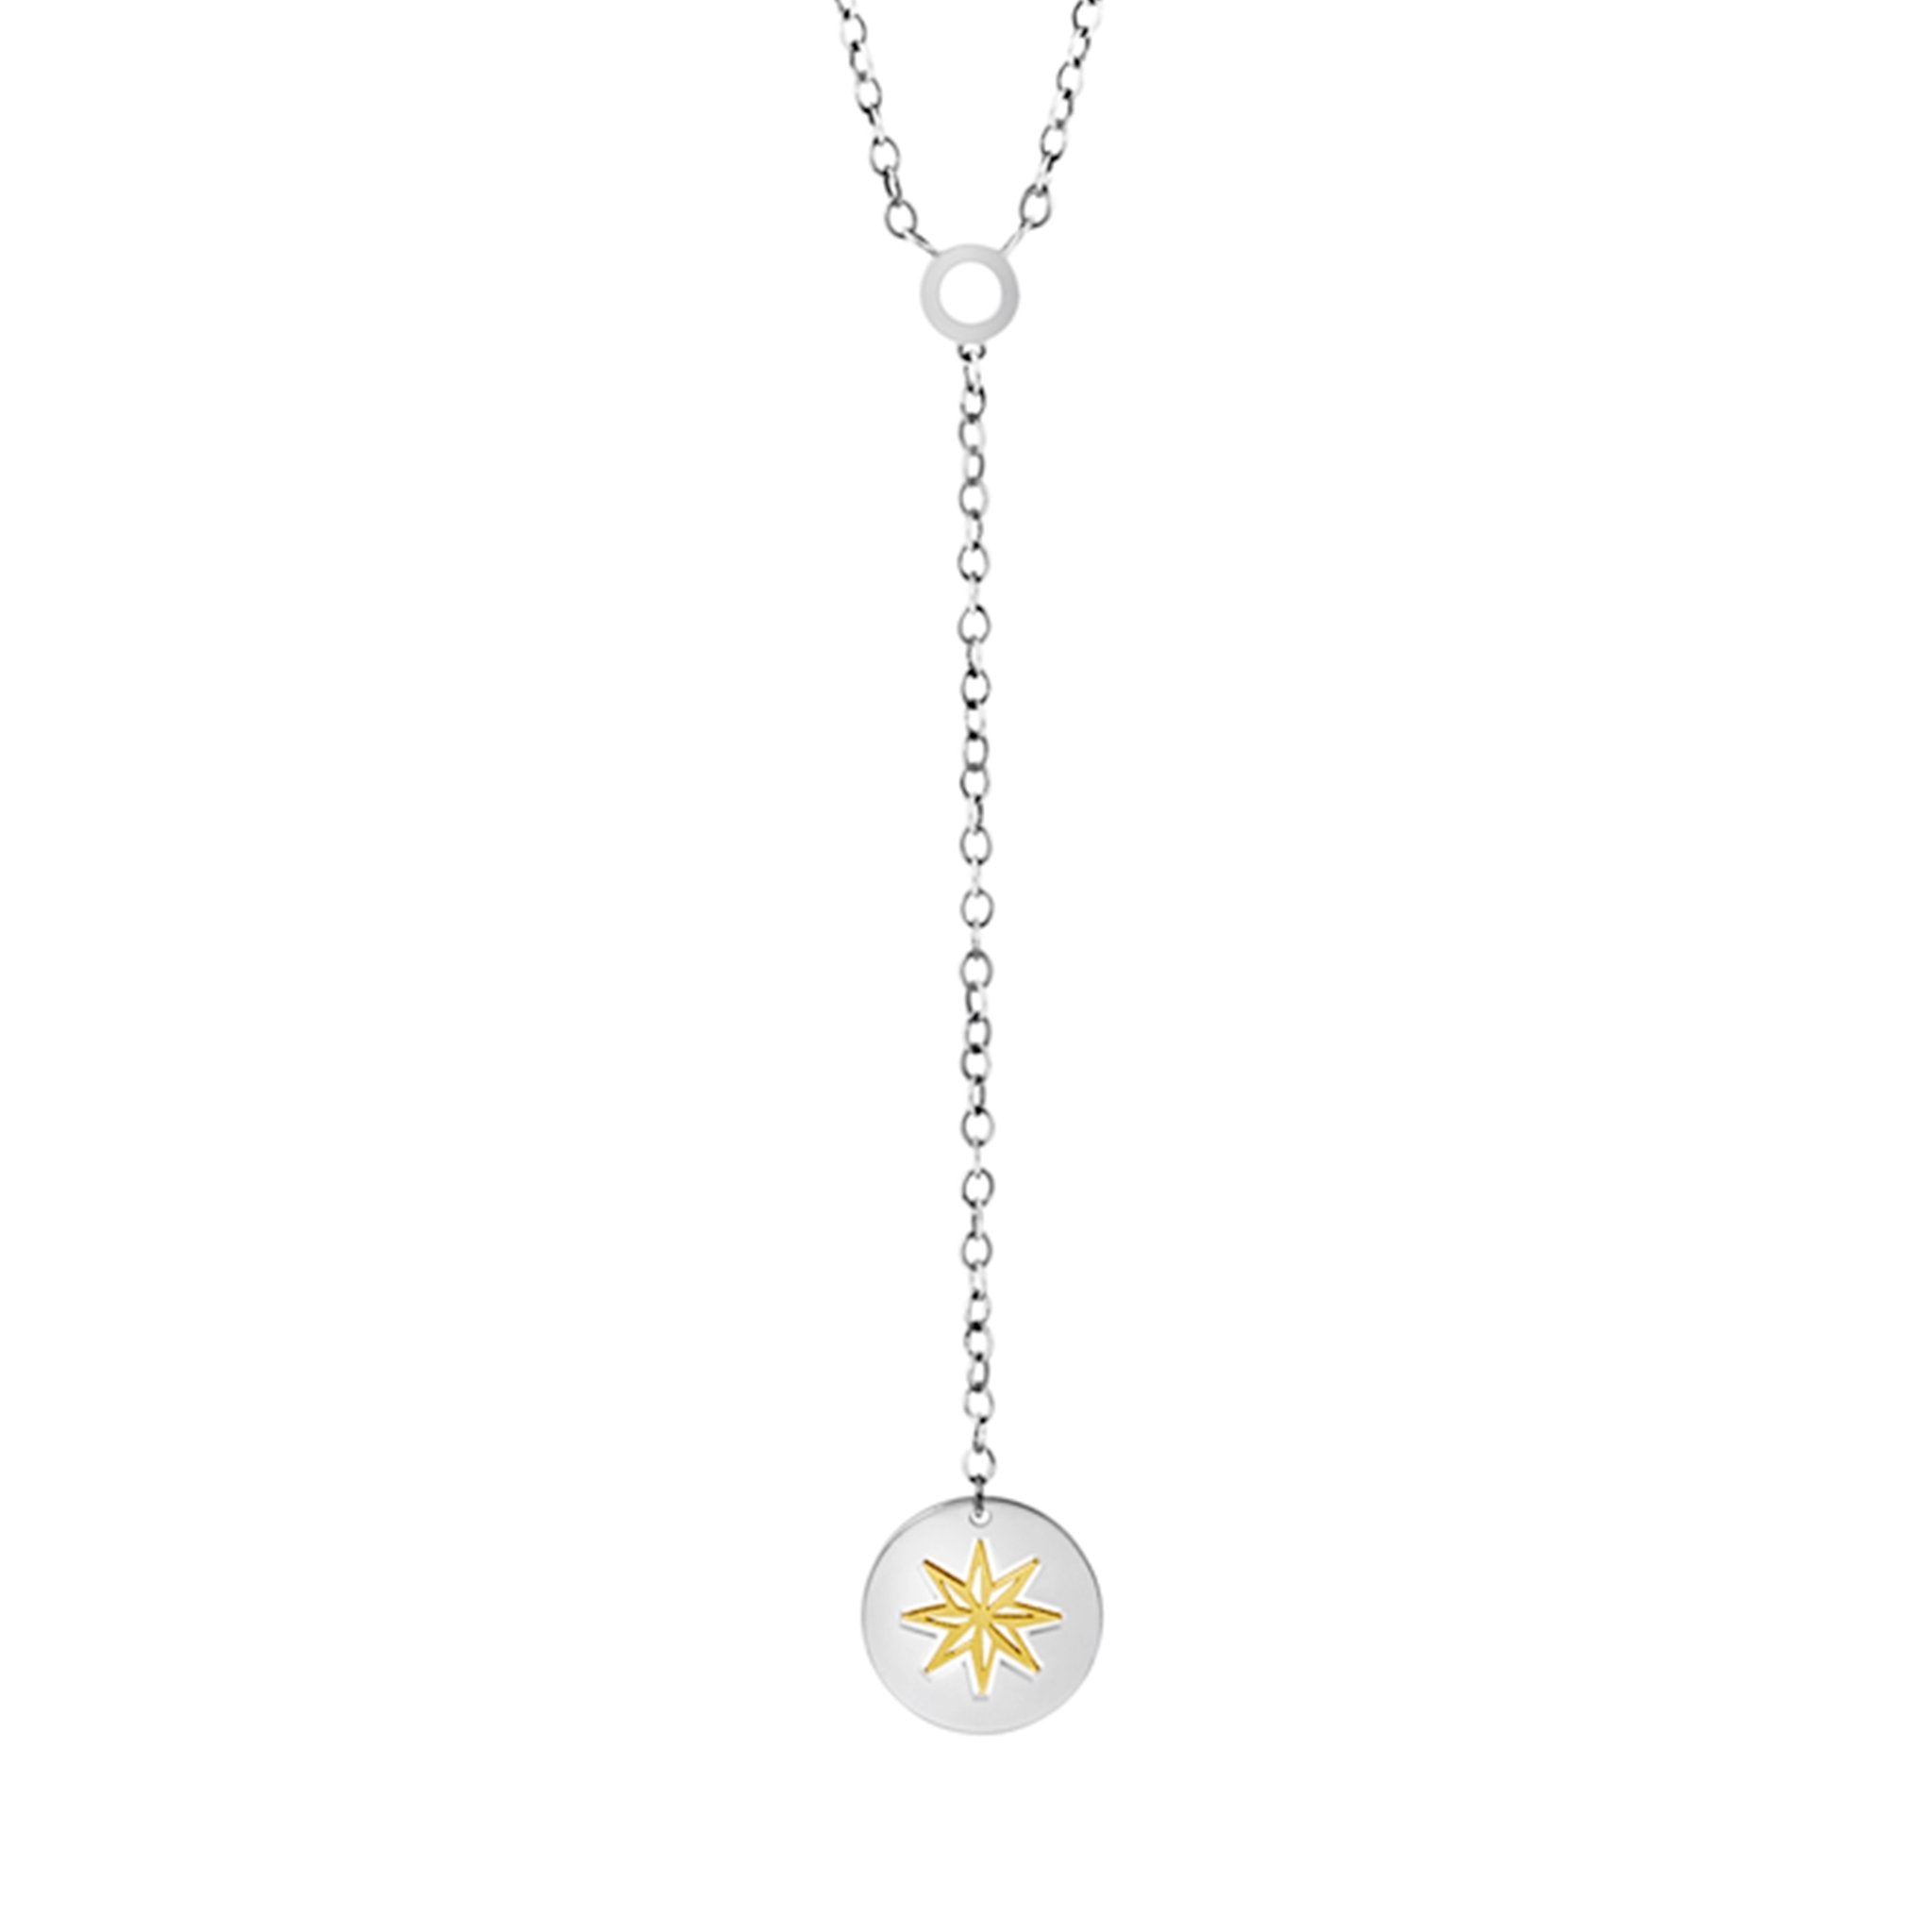 Star Pendant Necklace: 18k Gold, Rhodium Plate Silver